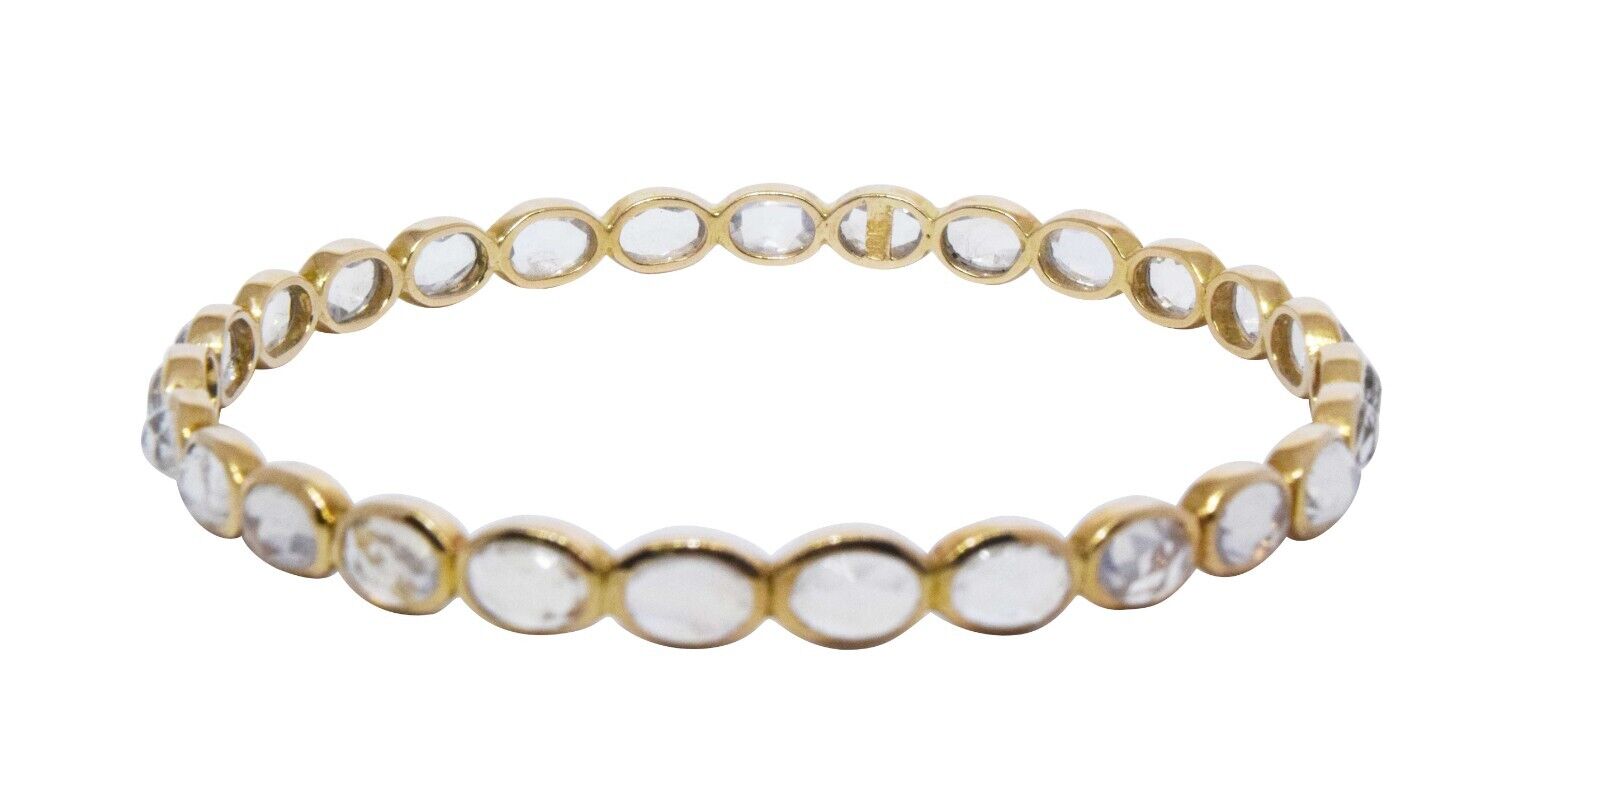 Ladies Bangle Bracelet 18k Yellow Gold and Pearl